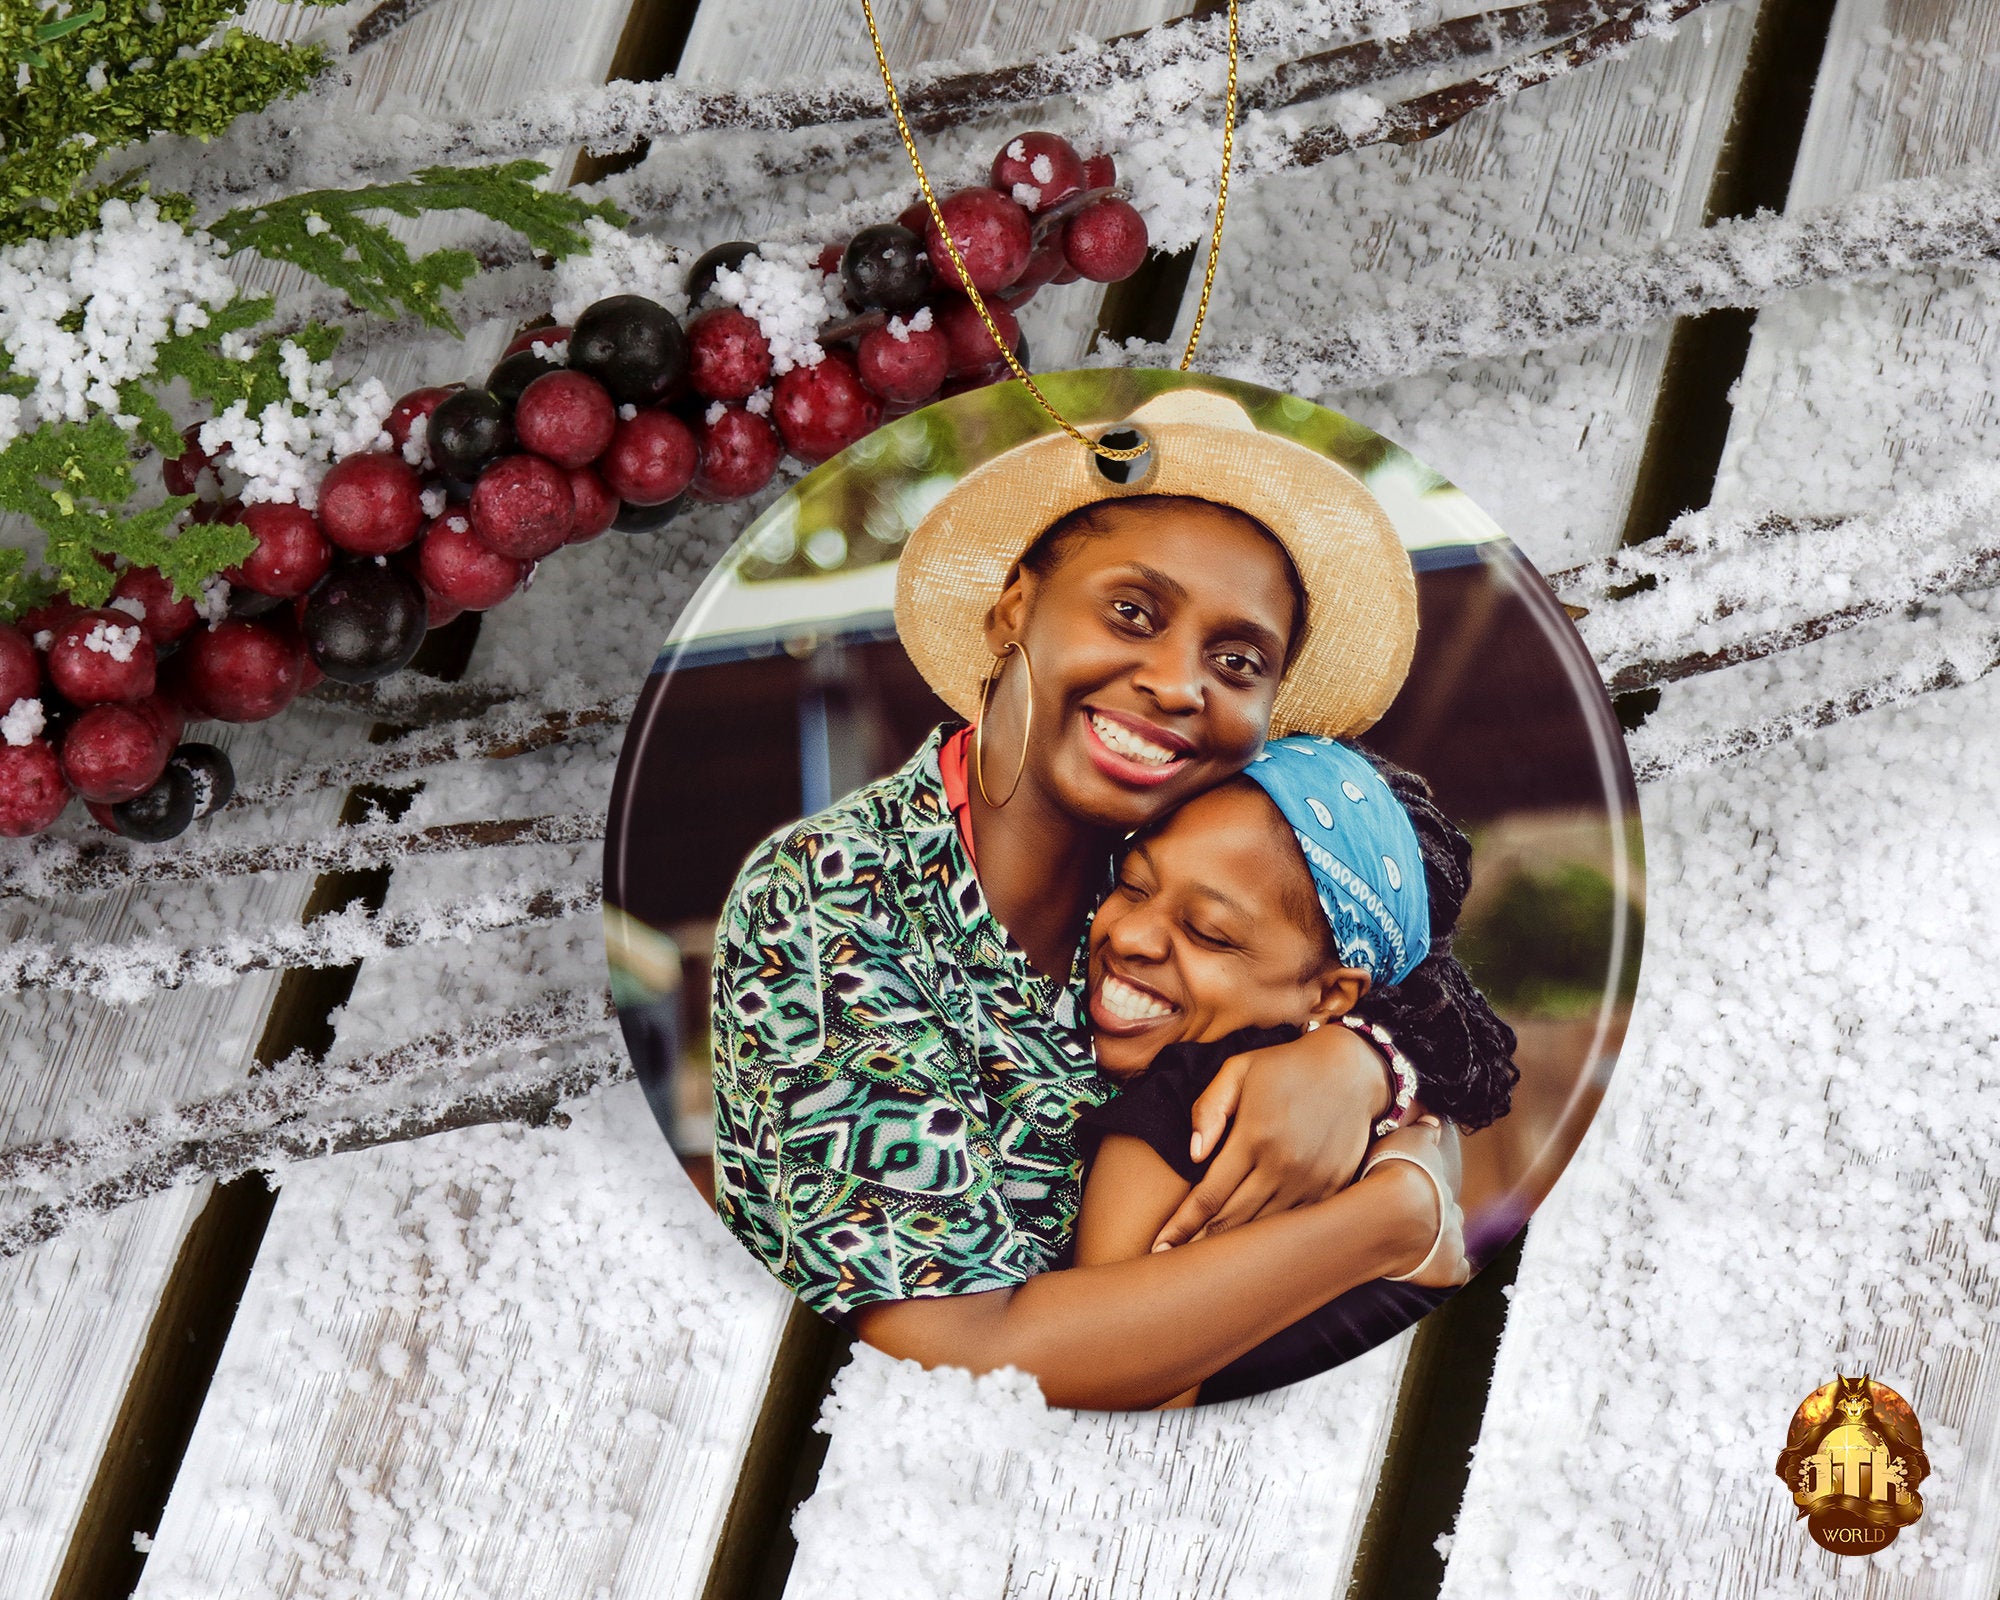 Personalized Ceramic Circle Ornament - Christmas Photo Ceramic Ornament - Custom Ceramic Christmas Ornament - Add Your Own Photo & Text